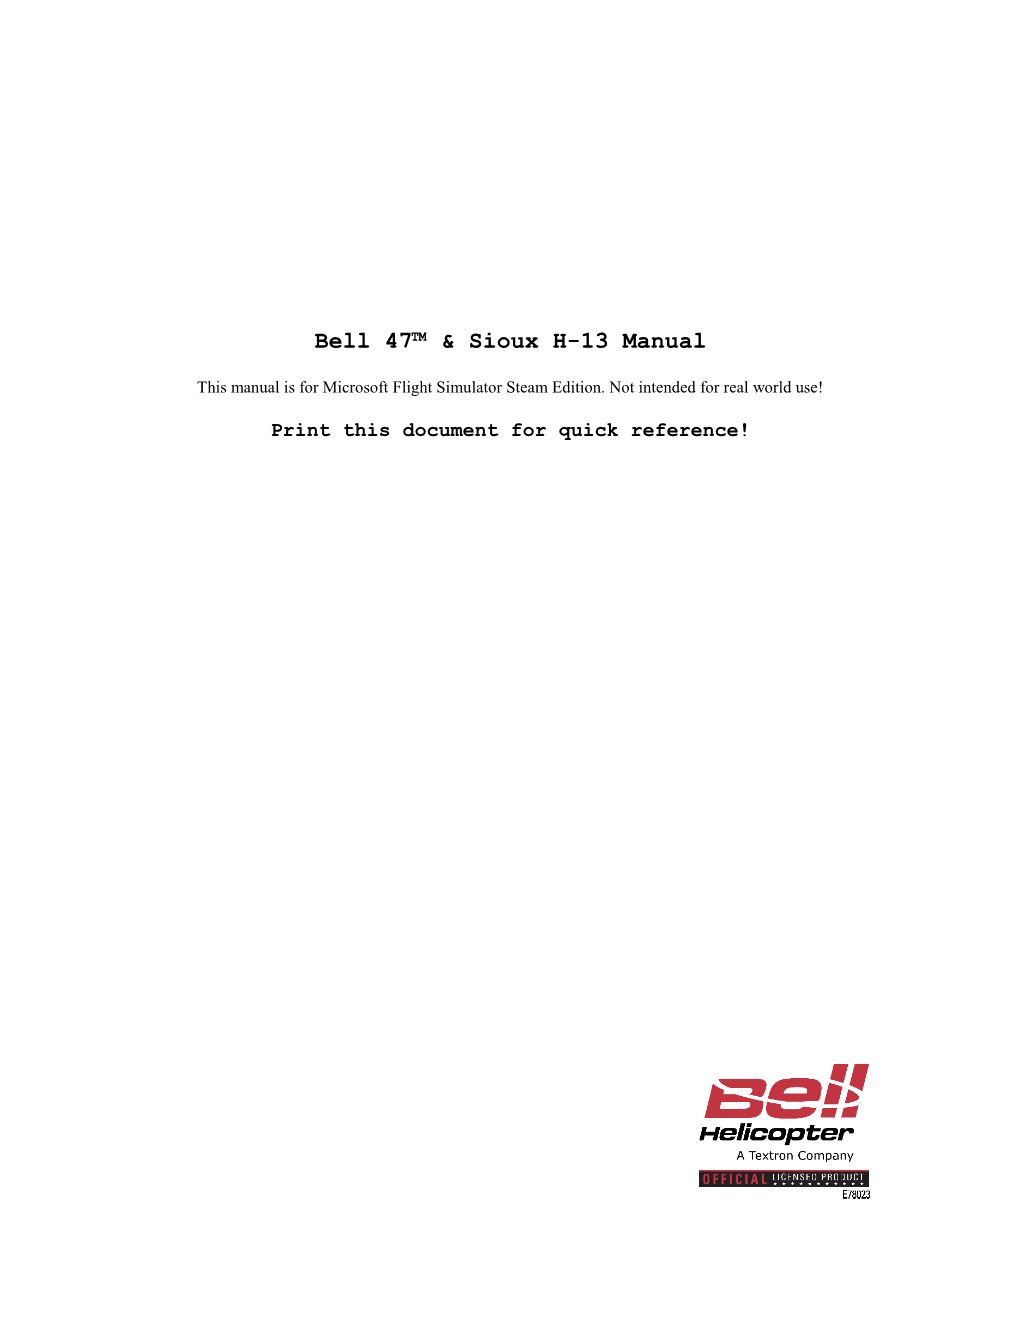 Bell 47™ & Sioux H-13 Manual